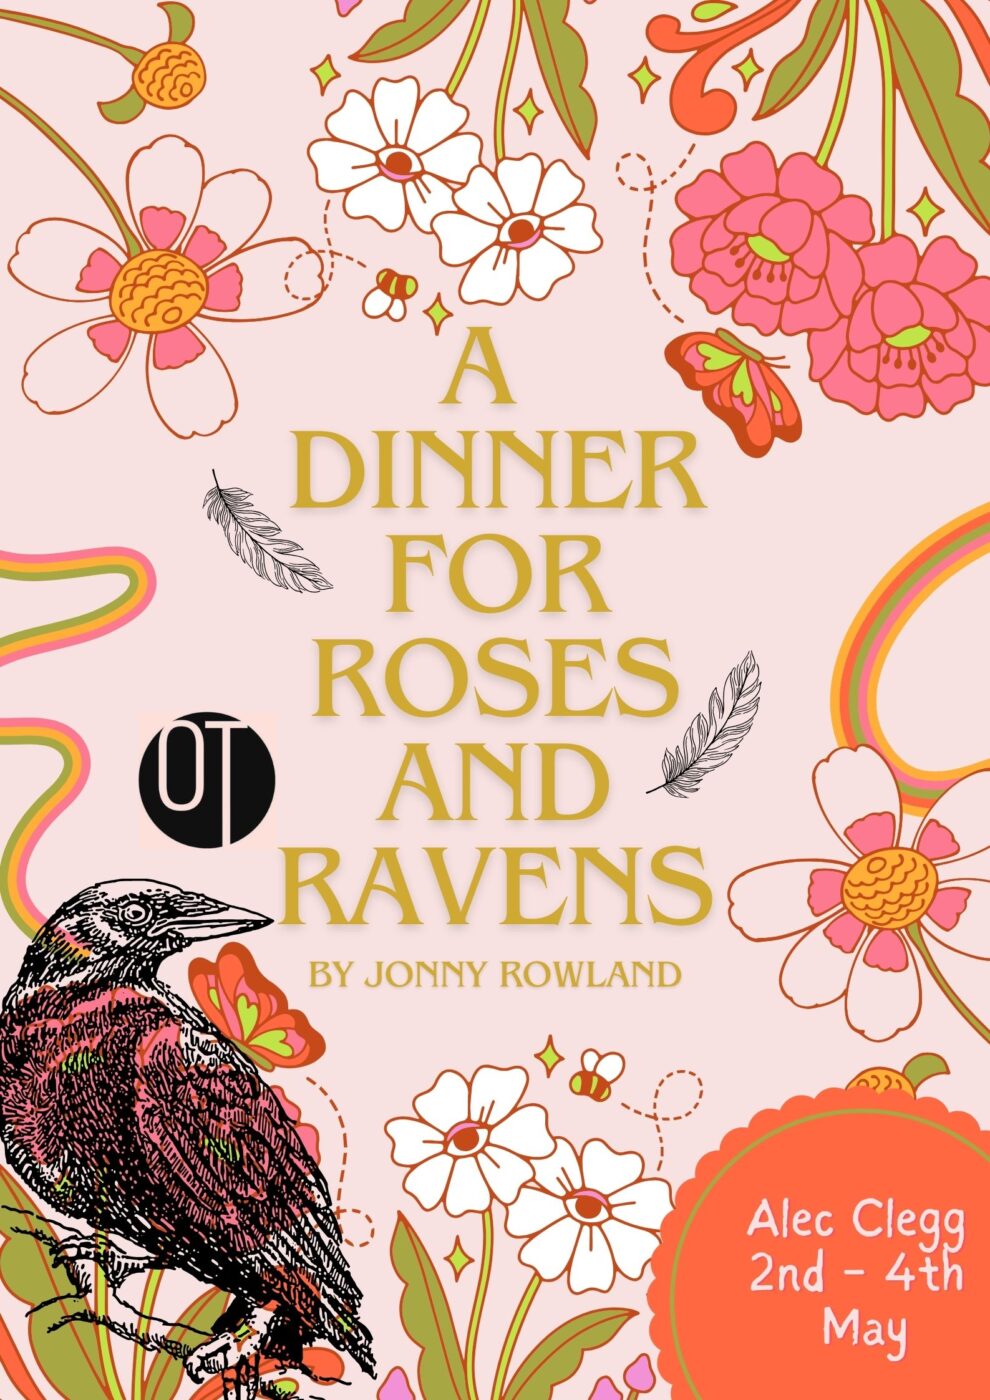 Poster containing show information, pink background with drawn flowers, butterflies and a raven